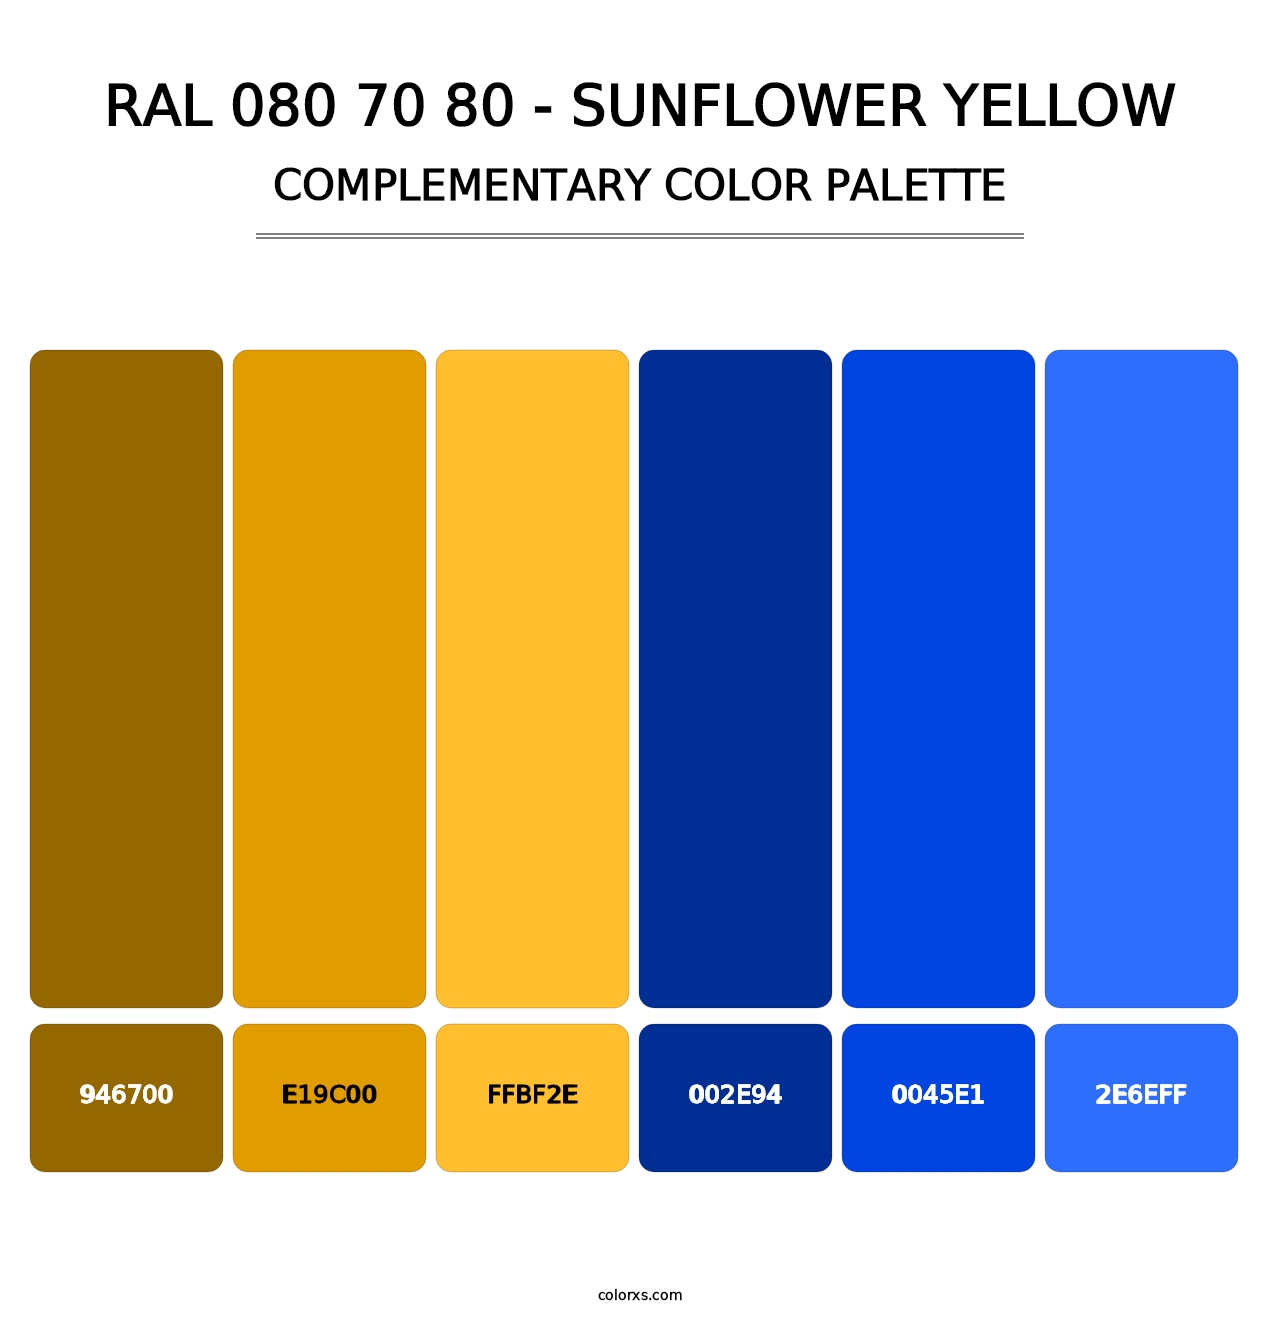 RAL 080 70 80 - Sunflower Yellow - Complementary Color Palette